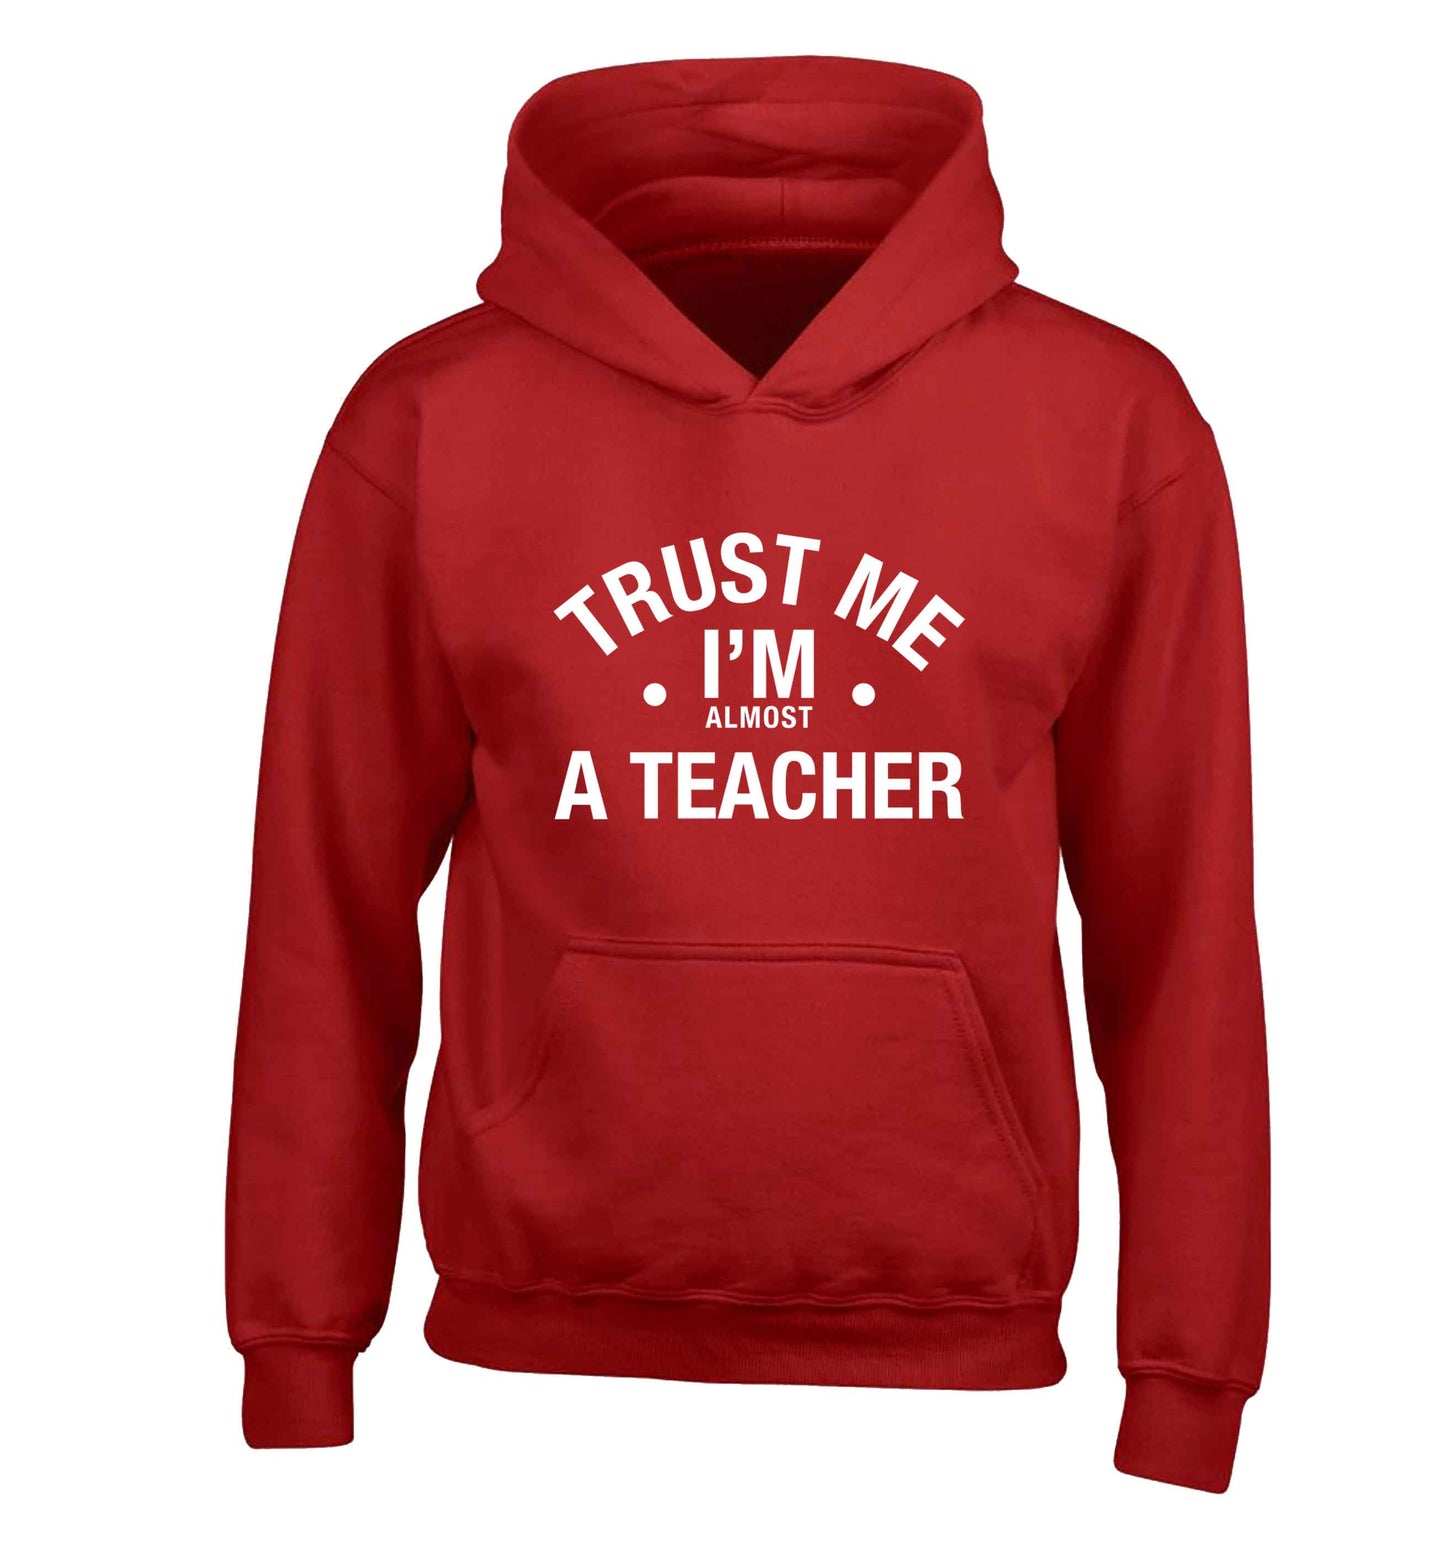 Trust me I'm almost a teacher children's red hoodie 12-13 Years